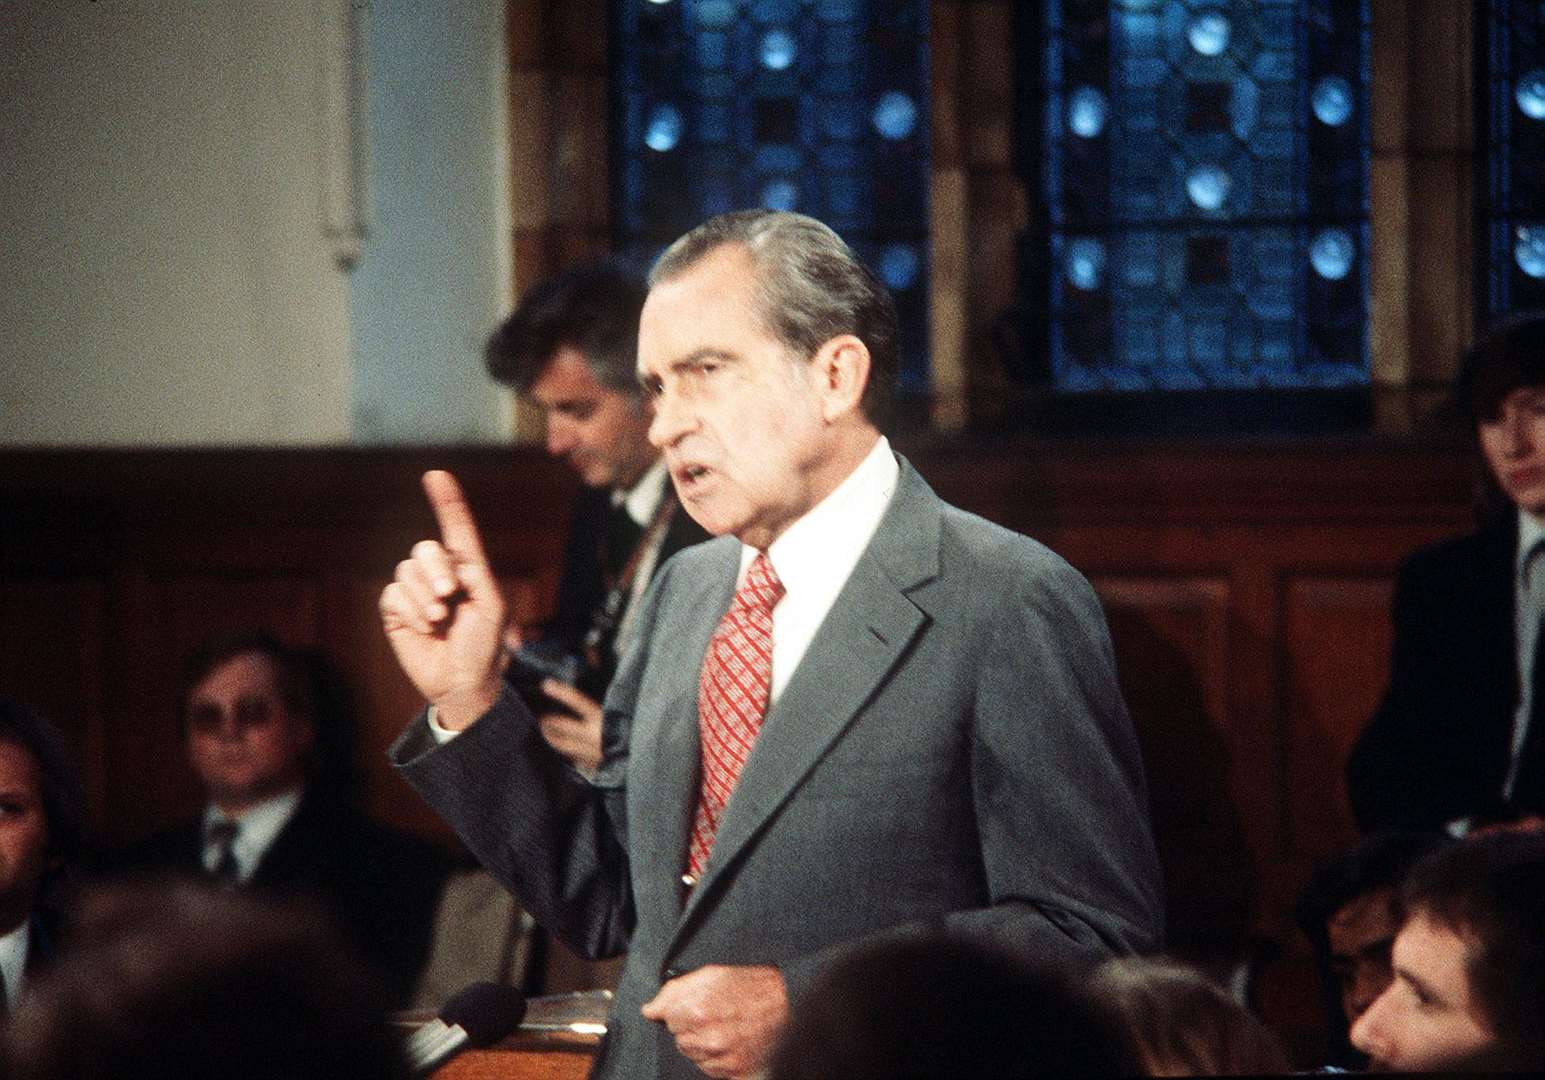 It was not to be for Richard Nixon, shown addressing the Oxford University Union Society, at the 1960 election against his young challenger (PA)